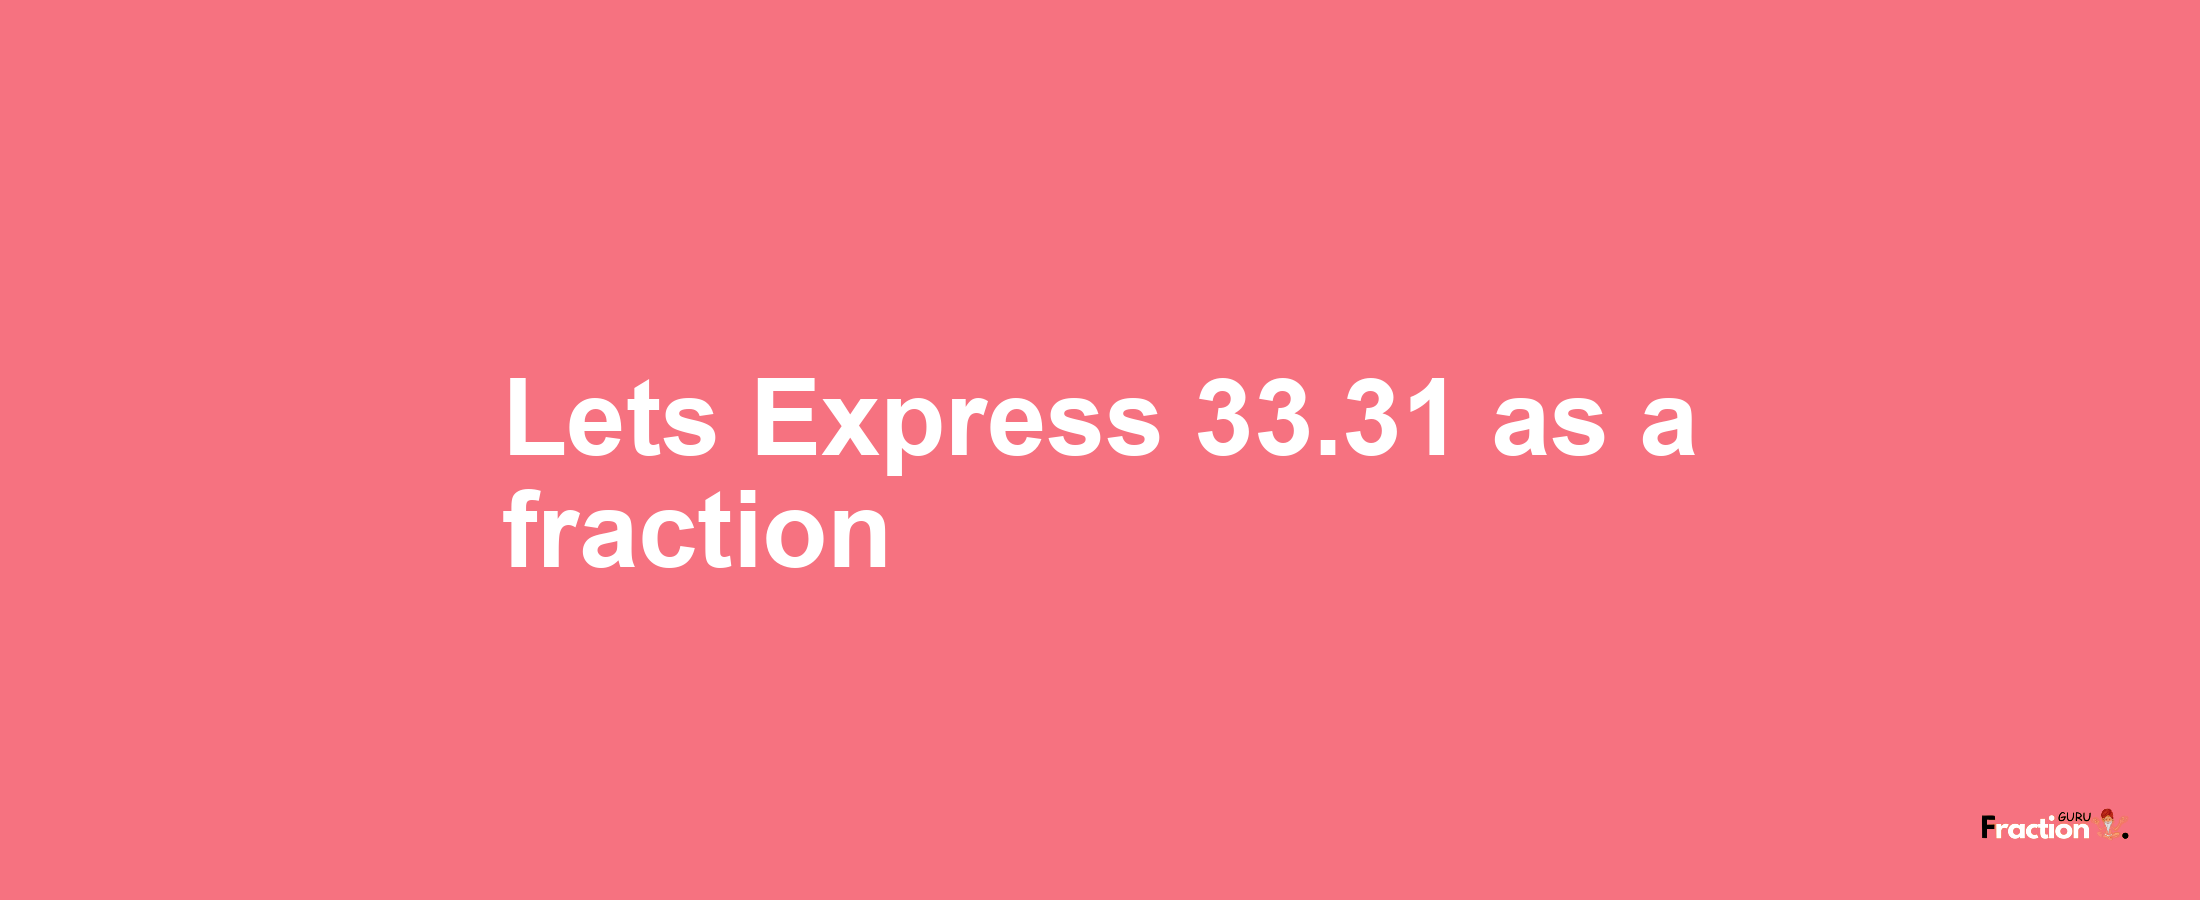 Lets Express 33.31 as afraction